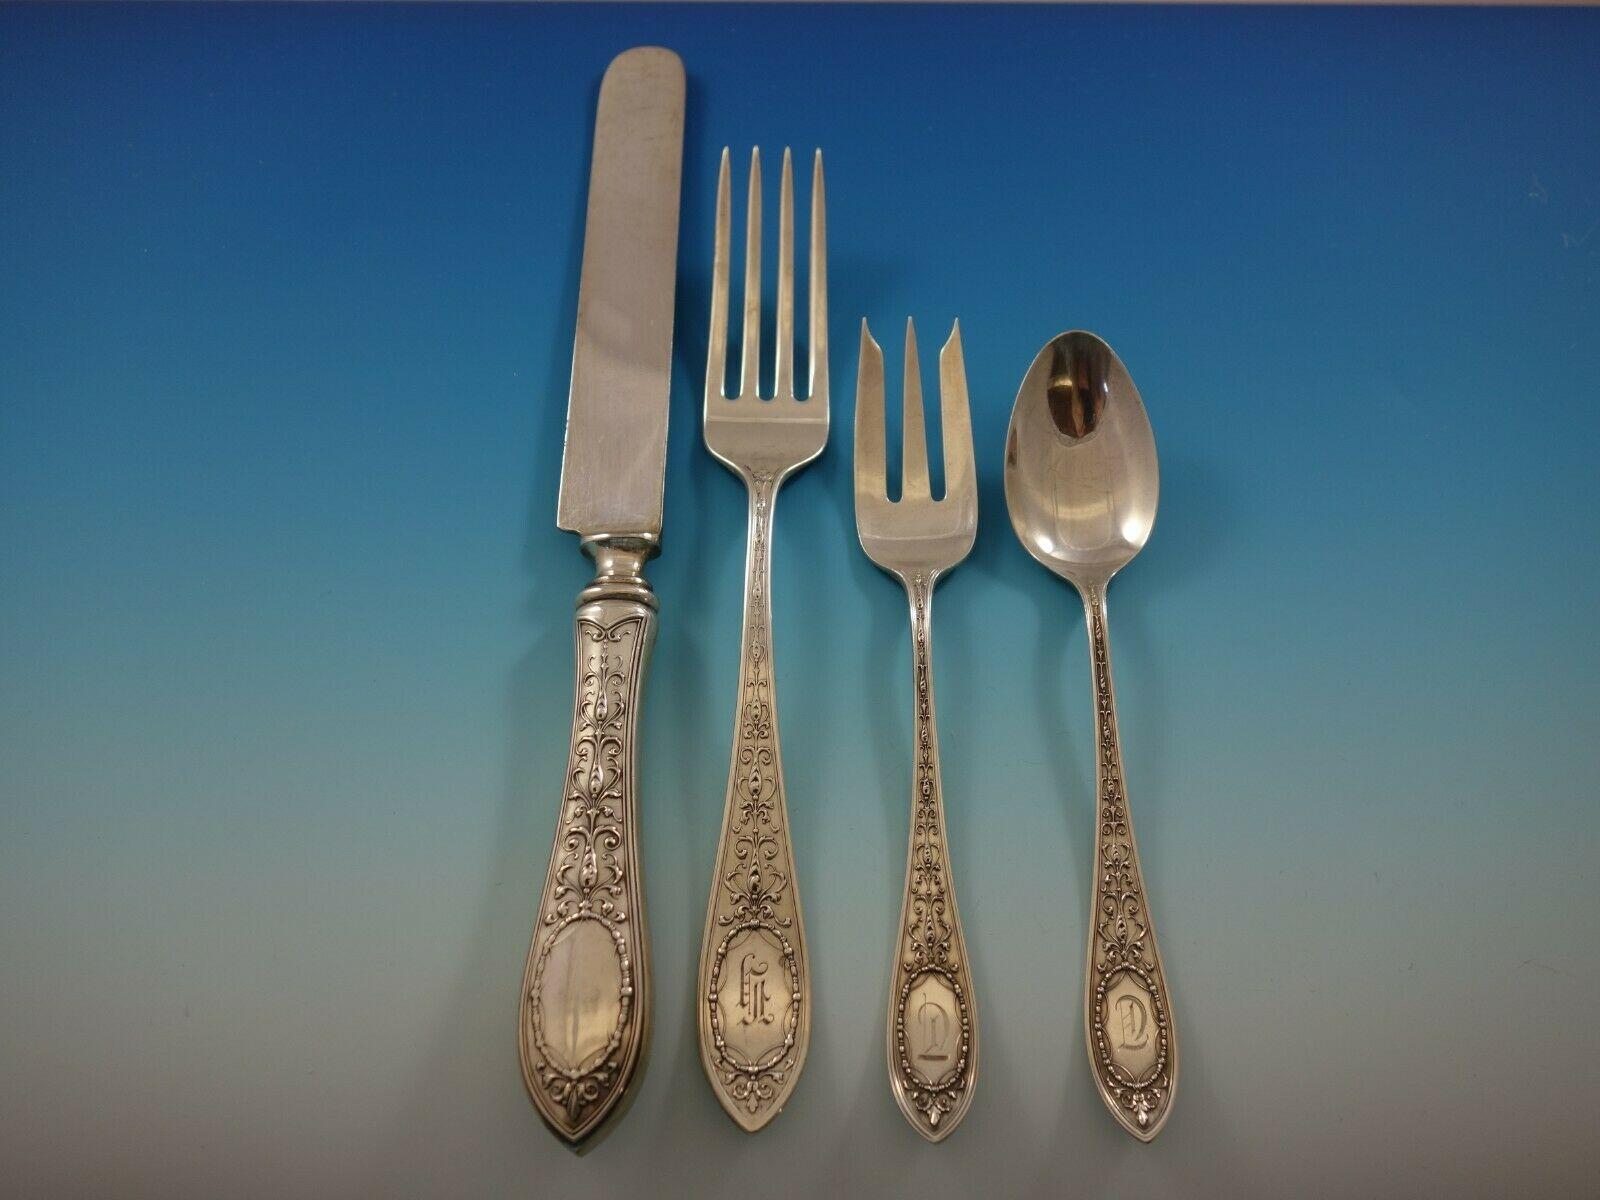 Lovely Adam by Whiting sterling silver flatware set - 72 pieces. This set includes:

12 dinner size knives, blunt silver plated blades, 10